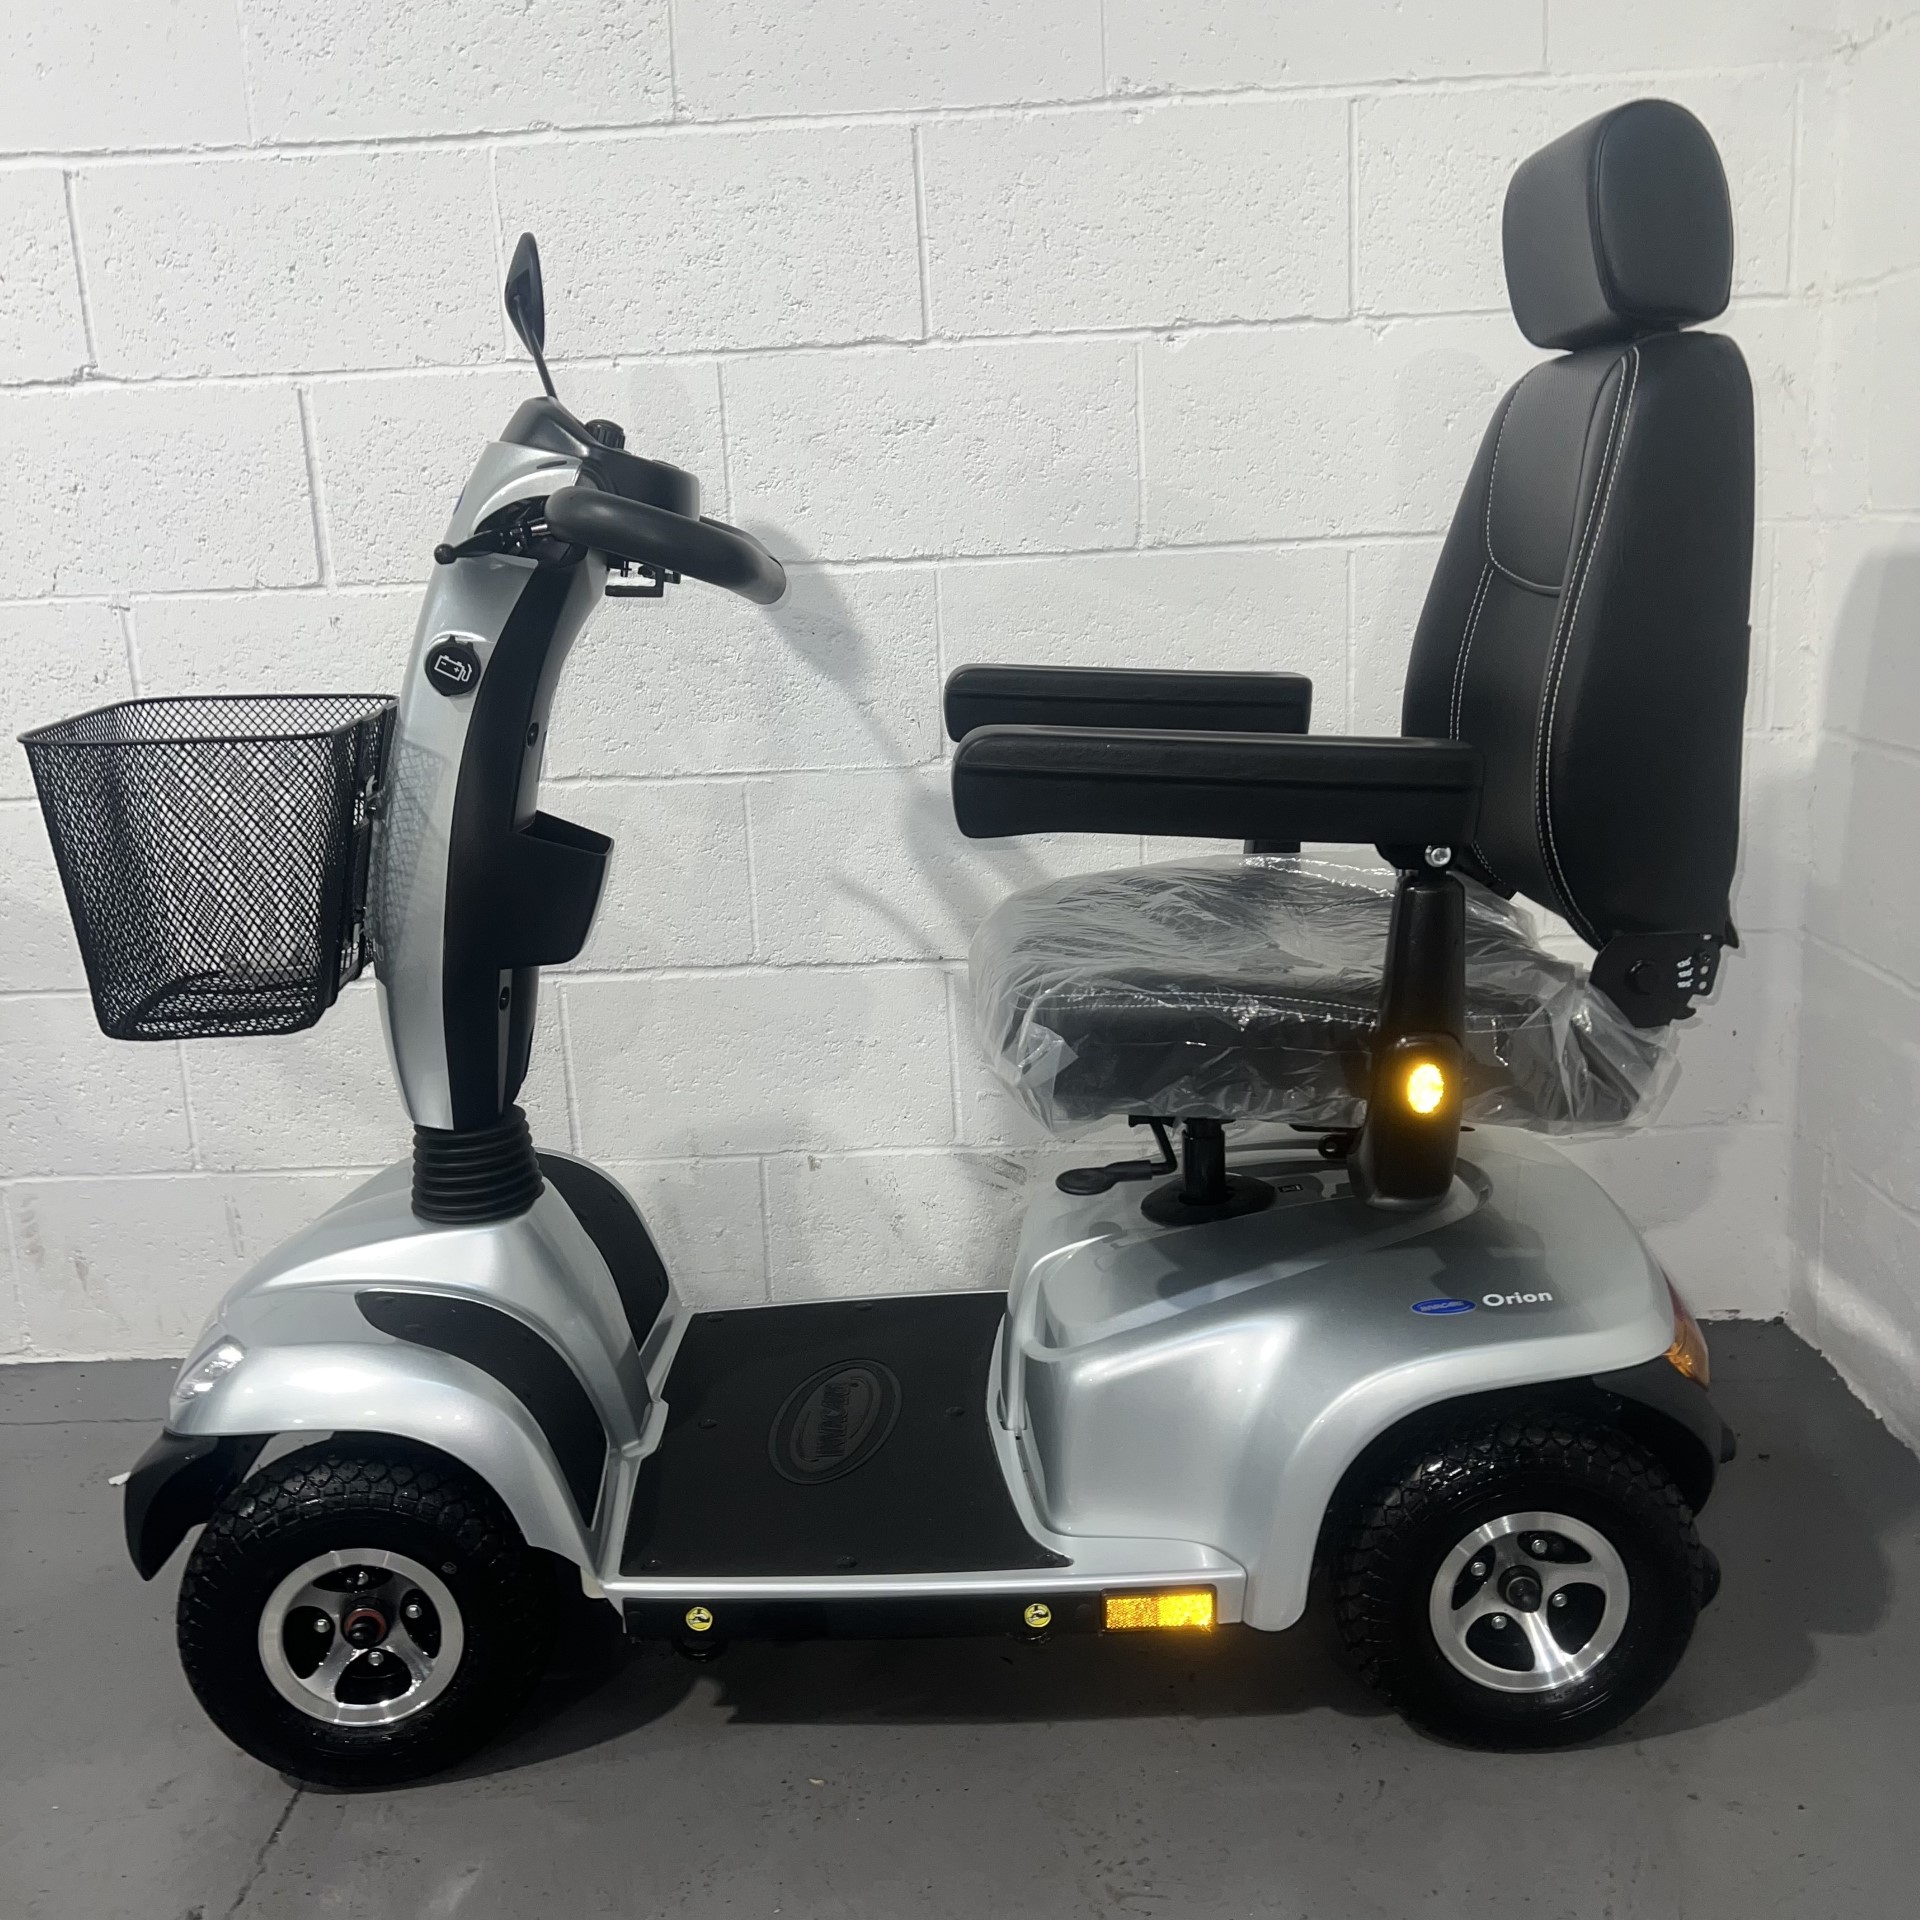 lightweight foldable mobility scooter uk